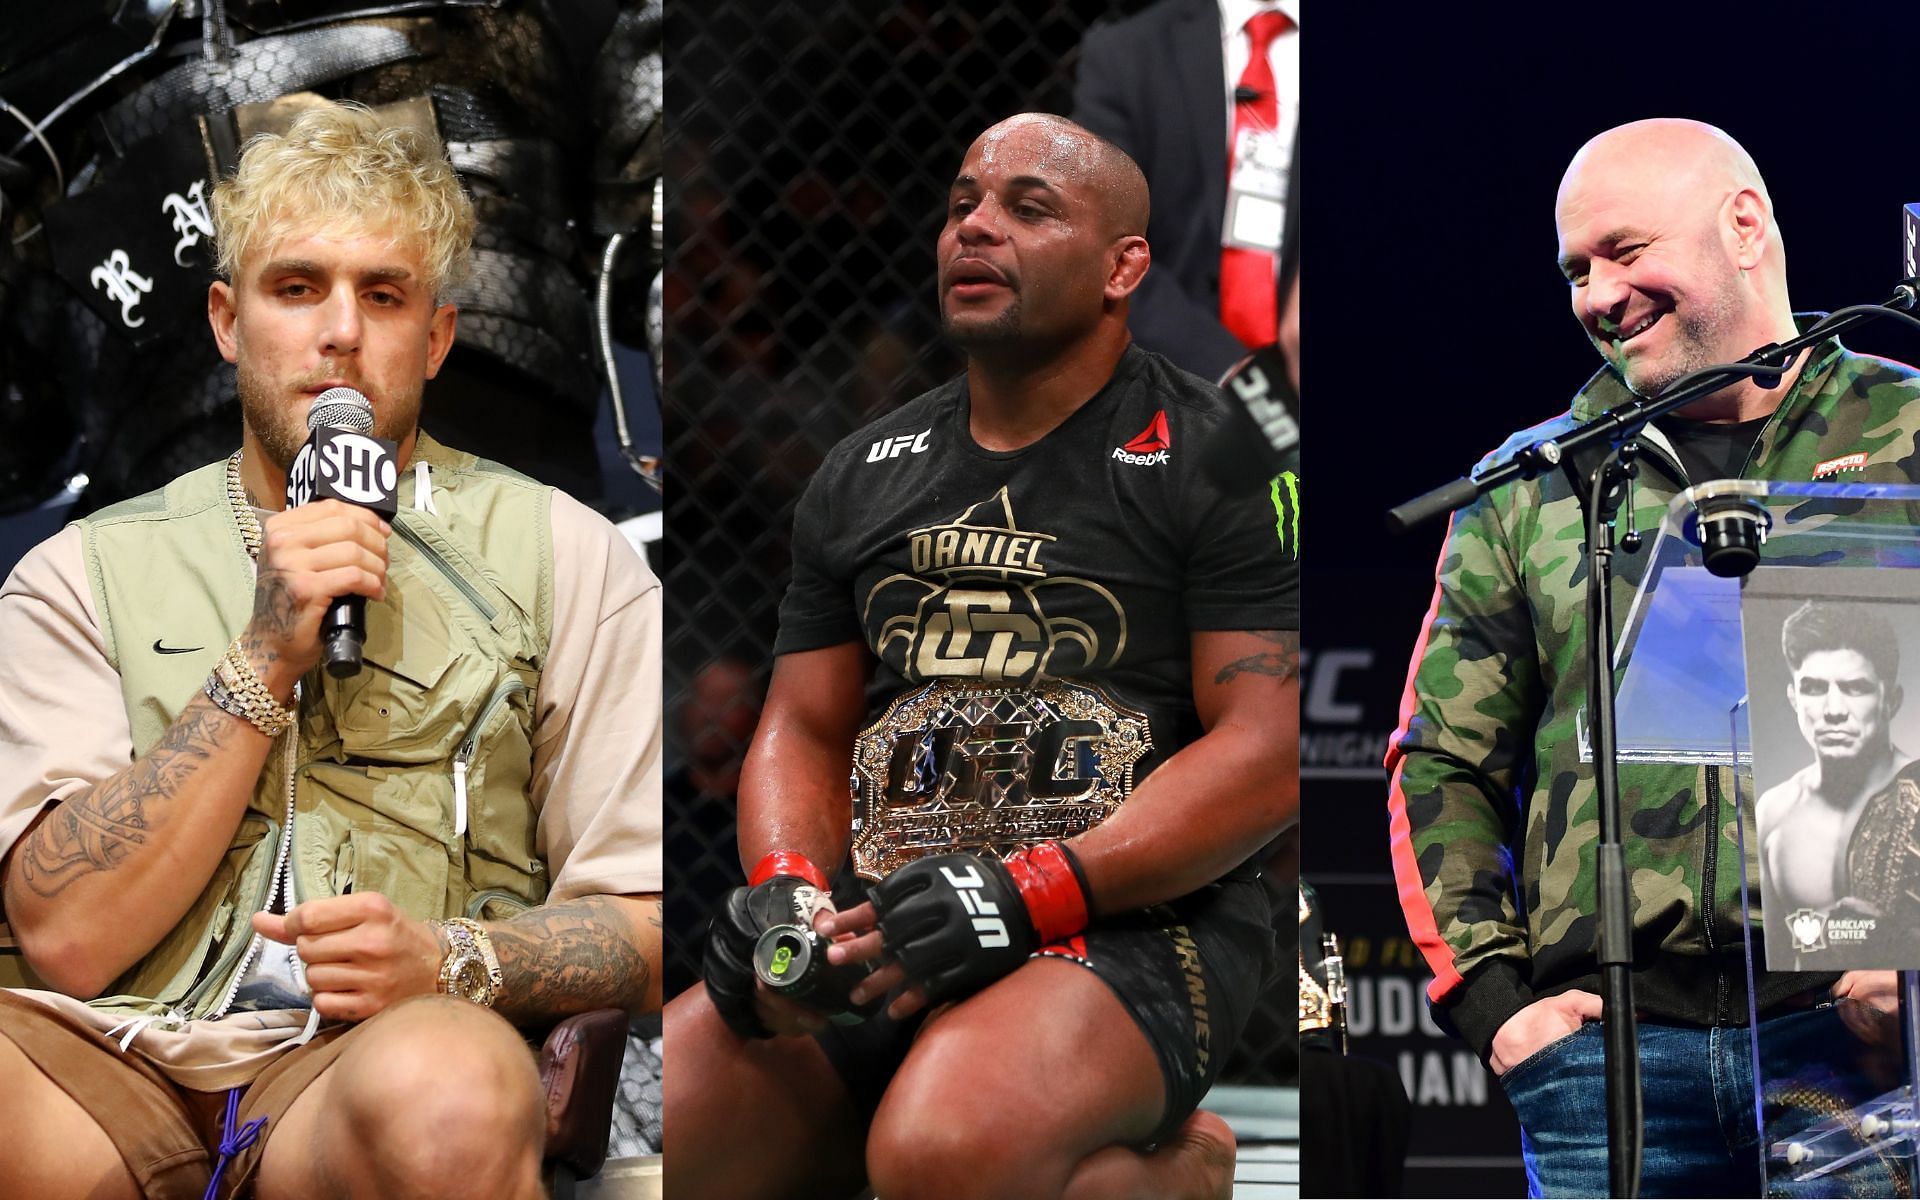 Jake Paul (left), Daniel Cormier (center), and Dana White (right) (Image credits Getty Images)